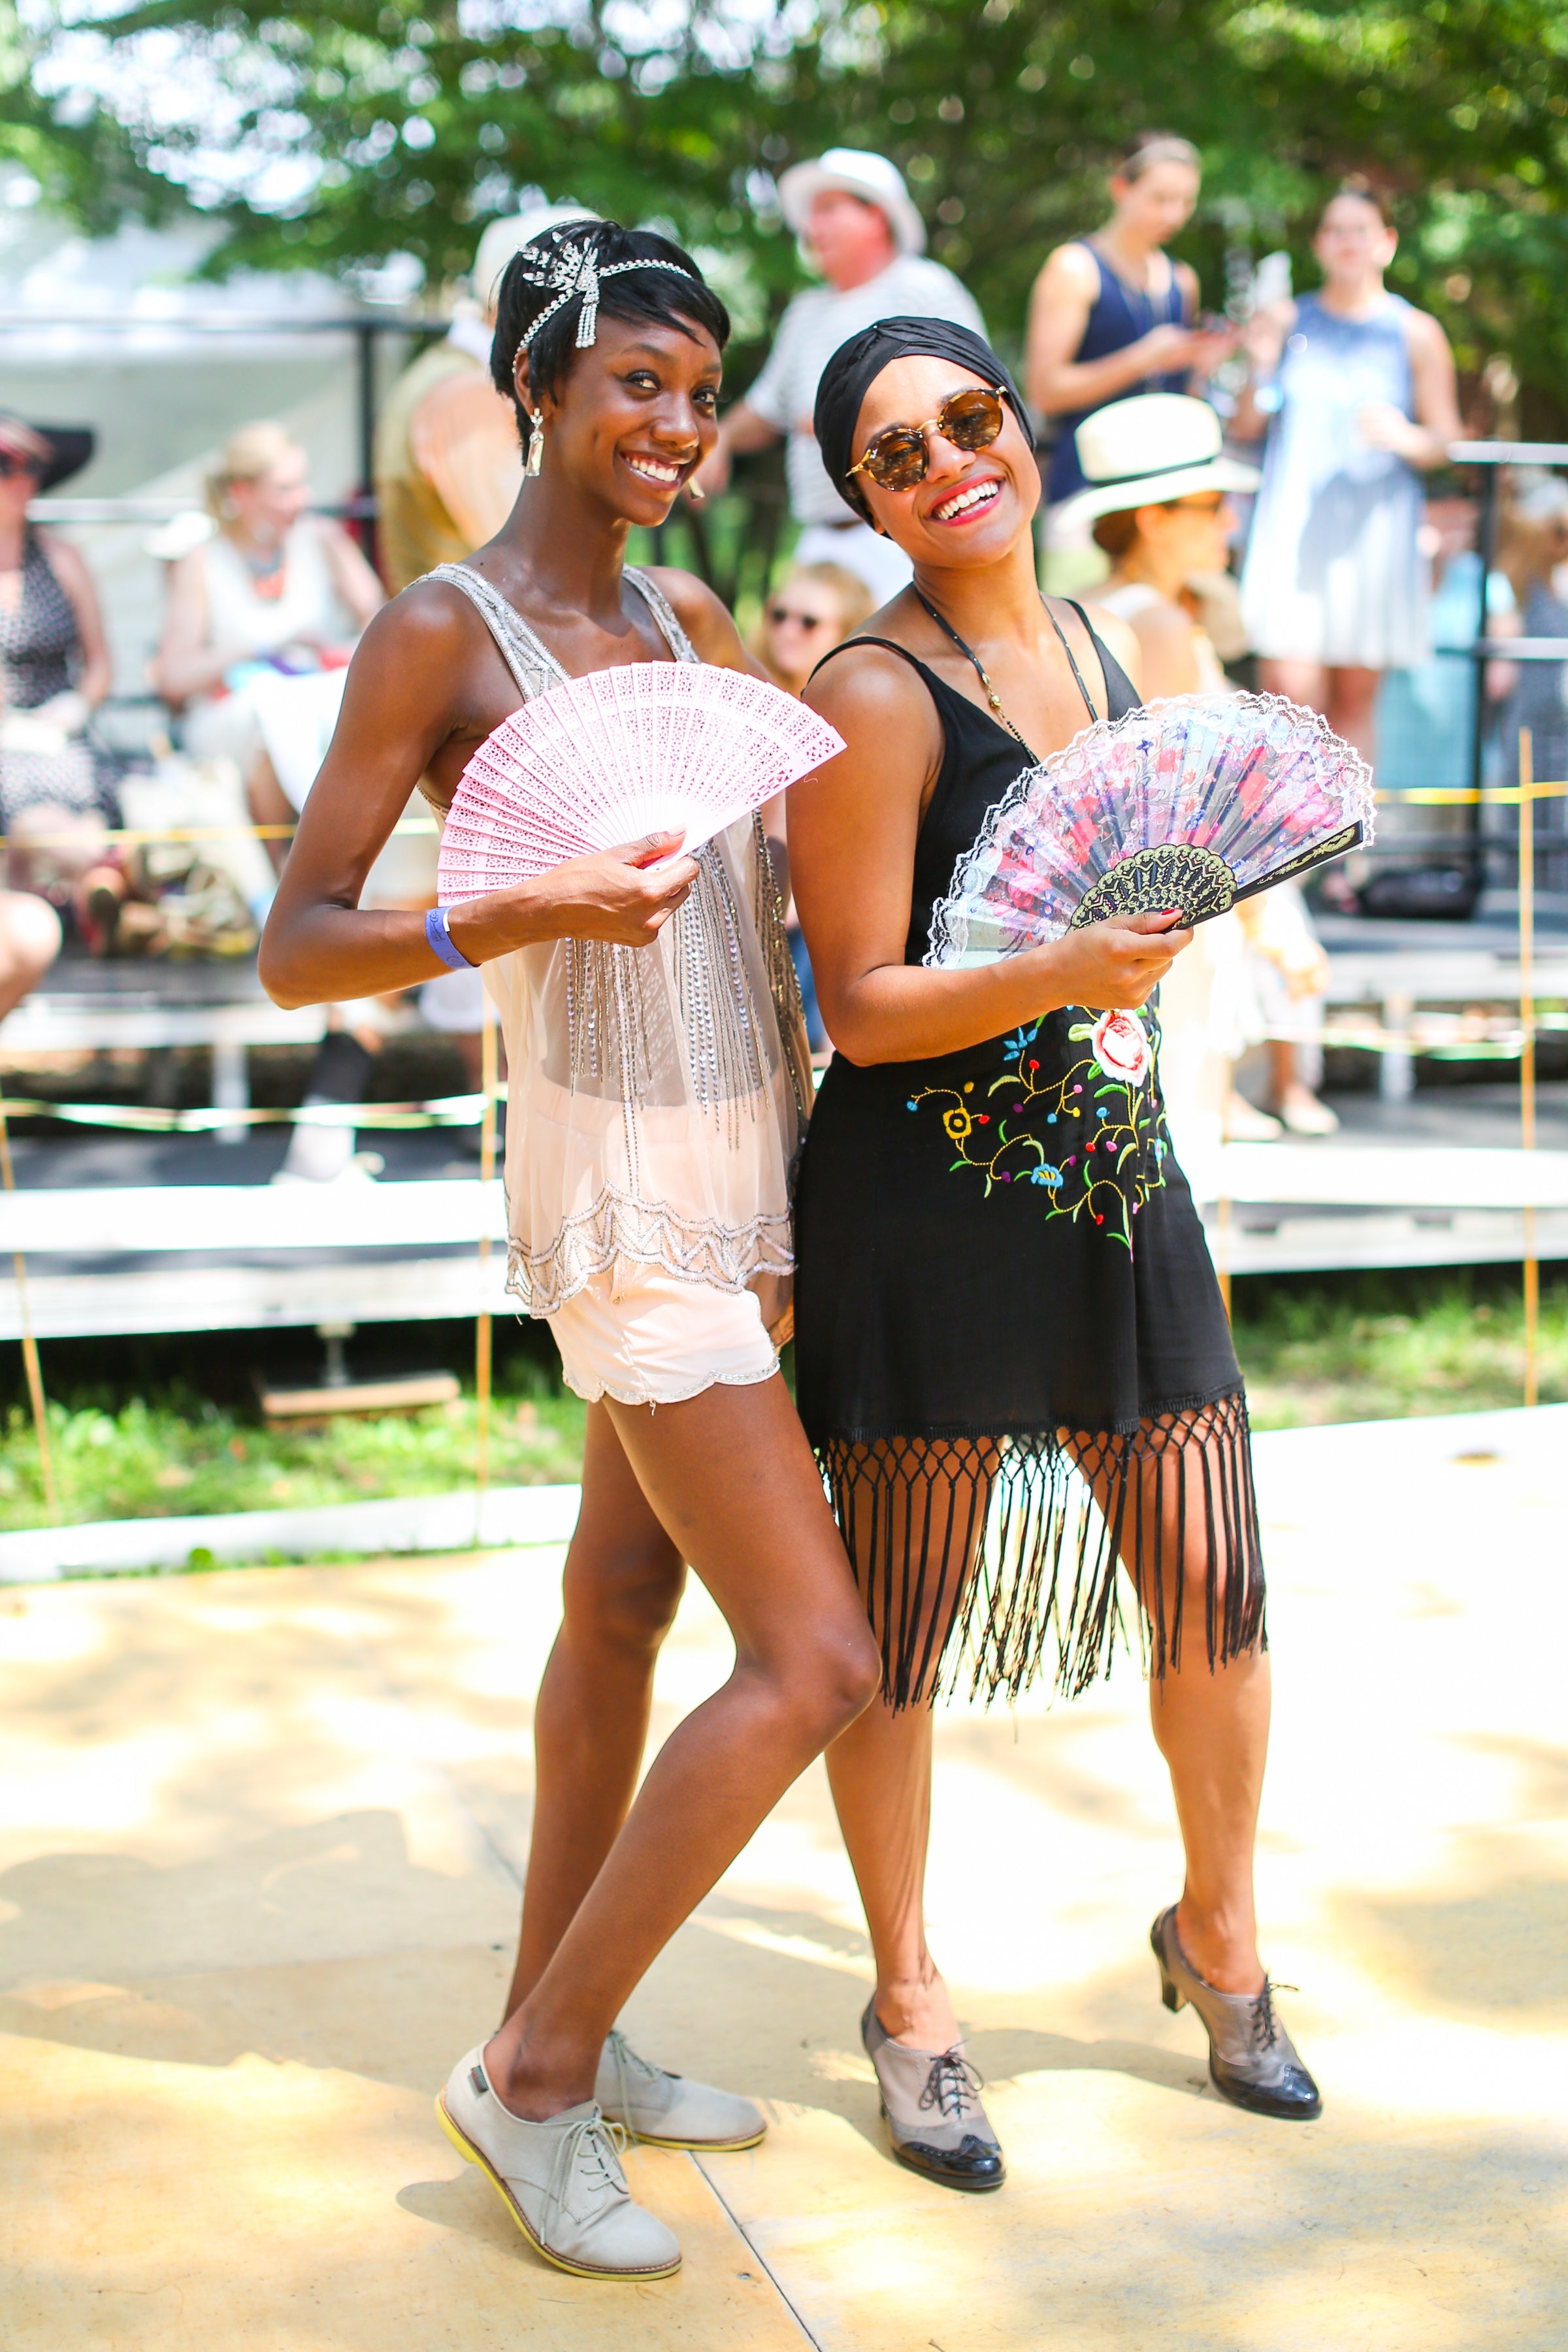 On the Scene at The 11th BiAnnual Jazz Age Lawn Party Essence